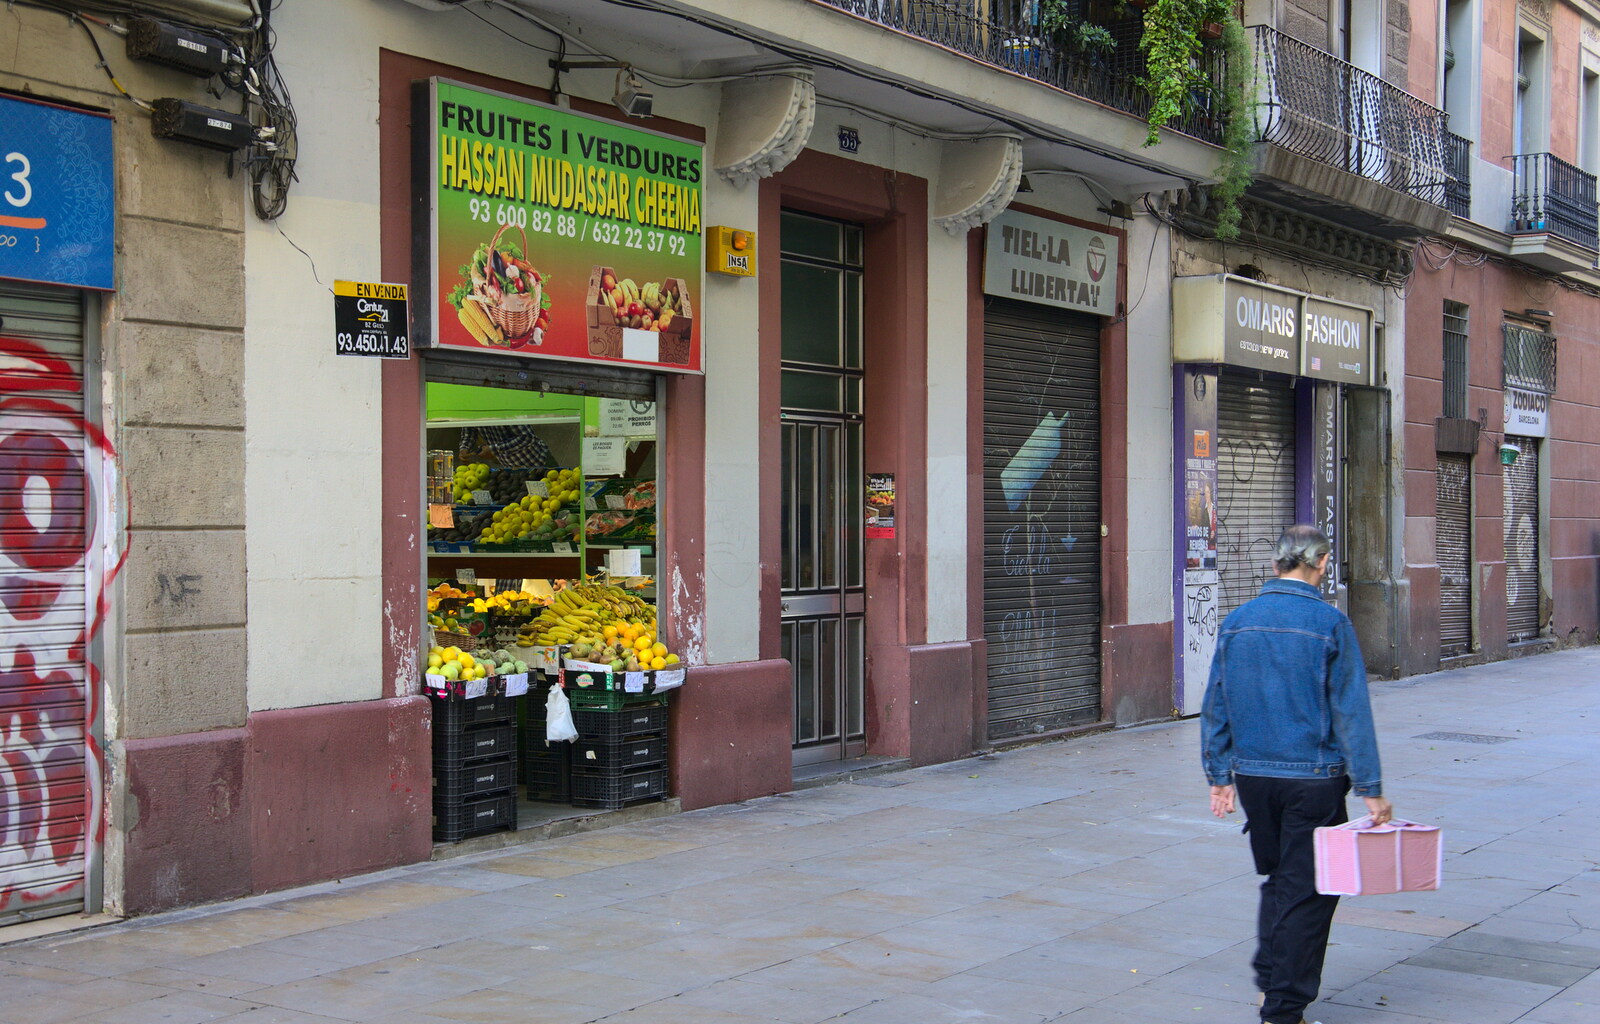 A fruit shop opens early from Barcelona and Parc Montjuïc, Catalonia, Spain - 21st October 2017